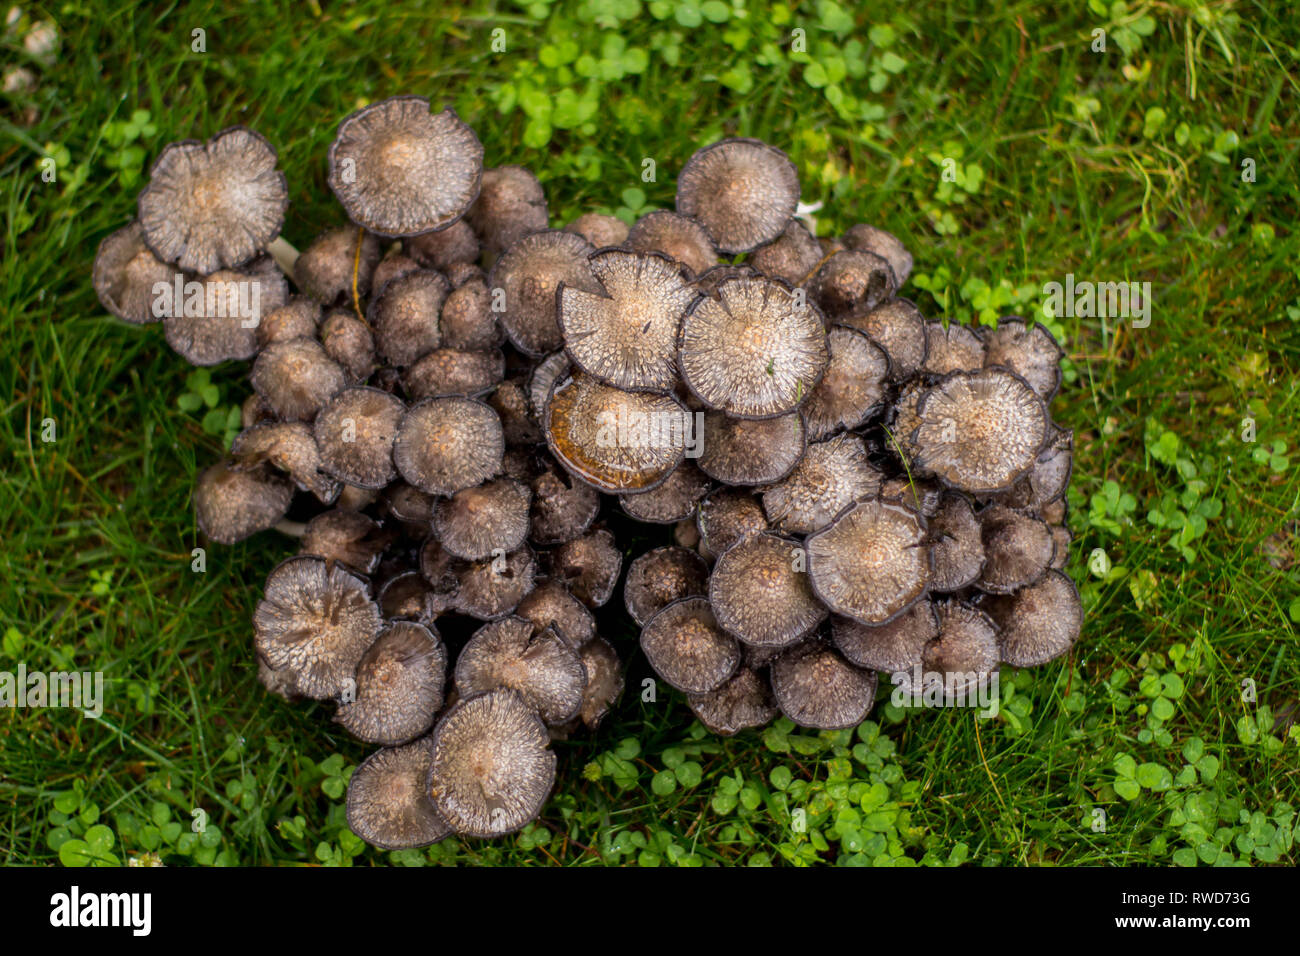 cluster of mushrooms after the rain Stock Photo